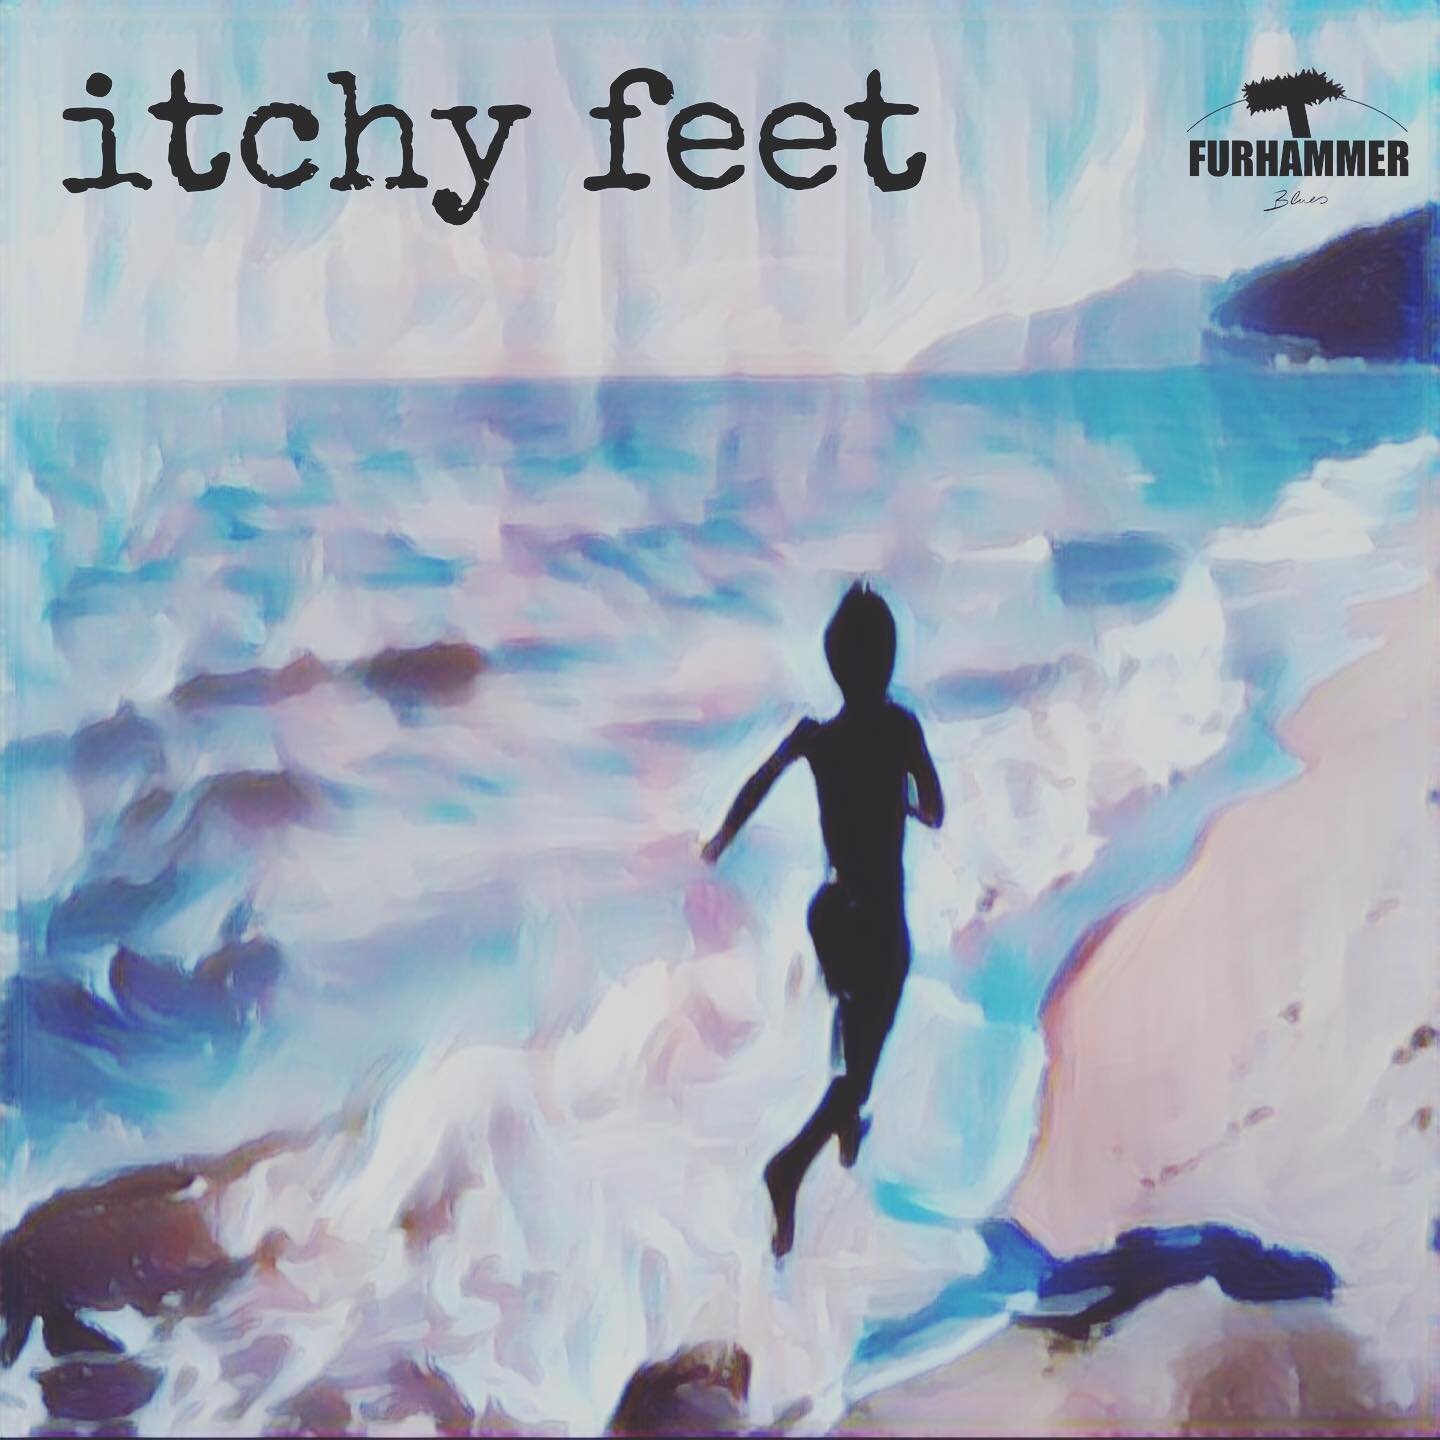 Every month a new single! &bdquo;itchy feet&ldquo; 👣 is out now! go listen to it on itunes, applemusic, spotify etc.